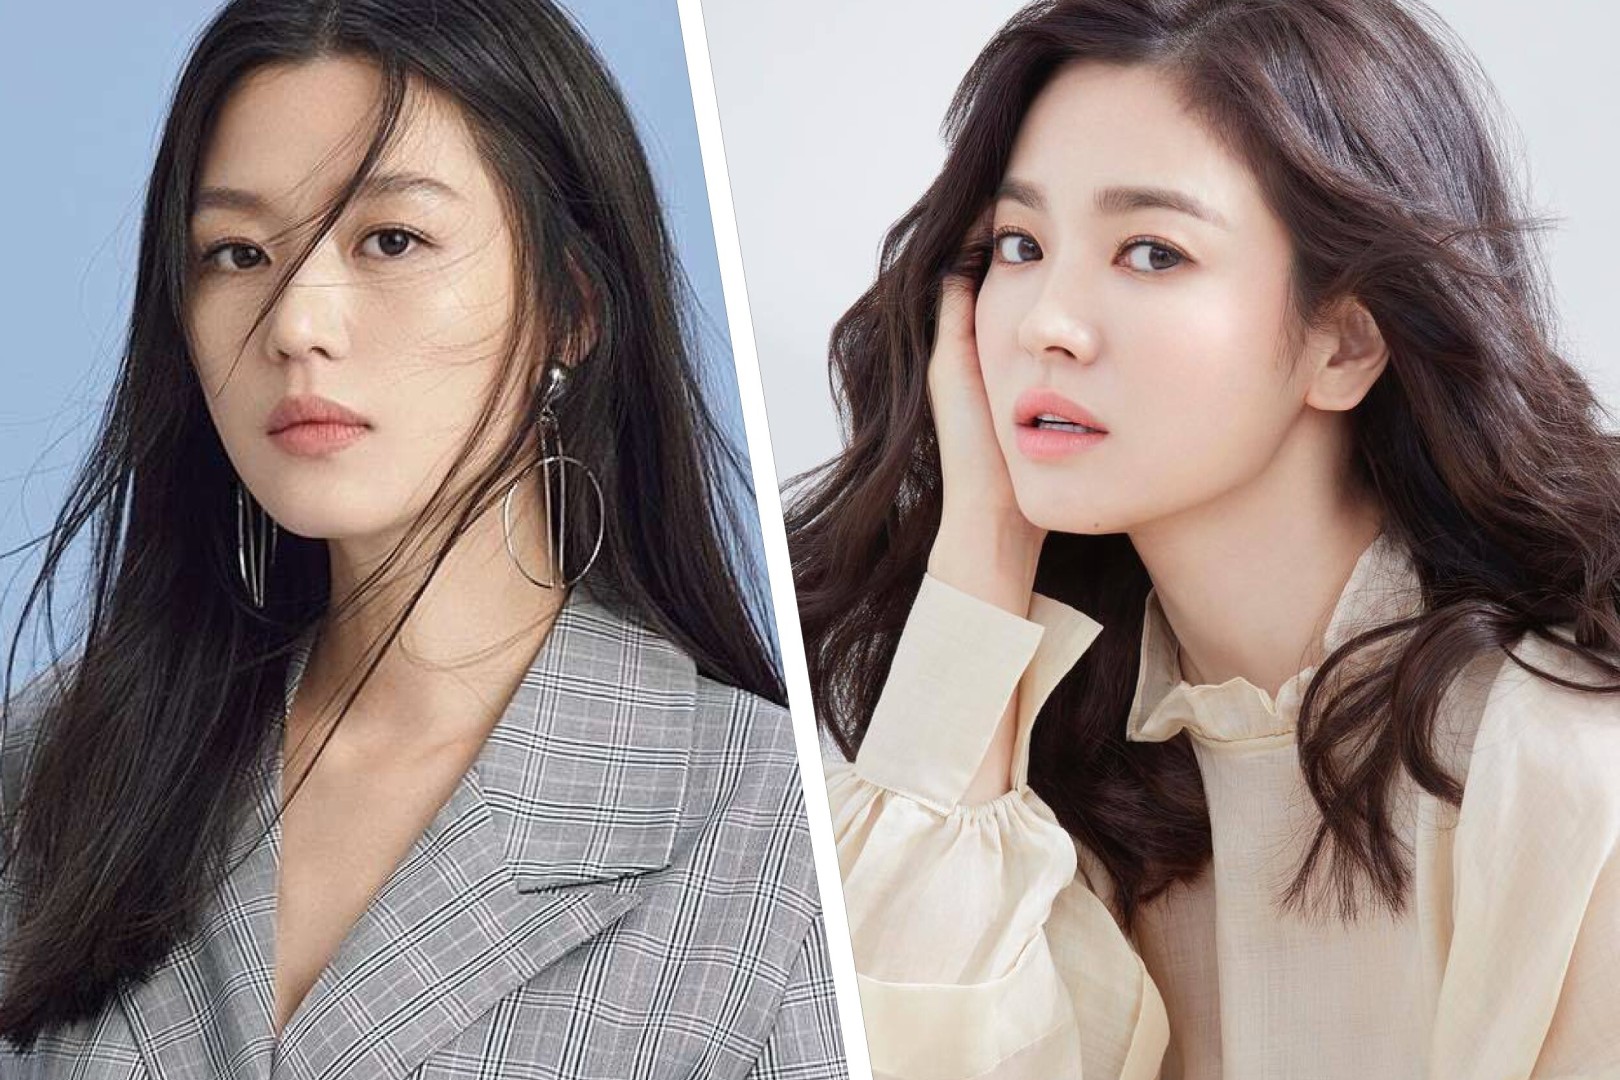 Jun Ji Hyun Vs Song Hye Kyo Korean Drama Stars Of My Love From The Star And Descendants Of The Sun Who Deserves The Title Of K Drama Queen South China Morning Post